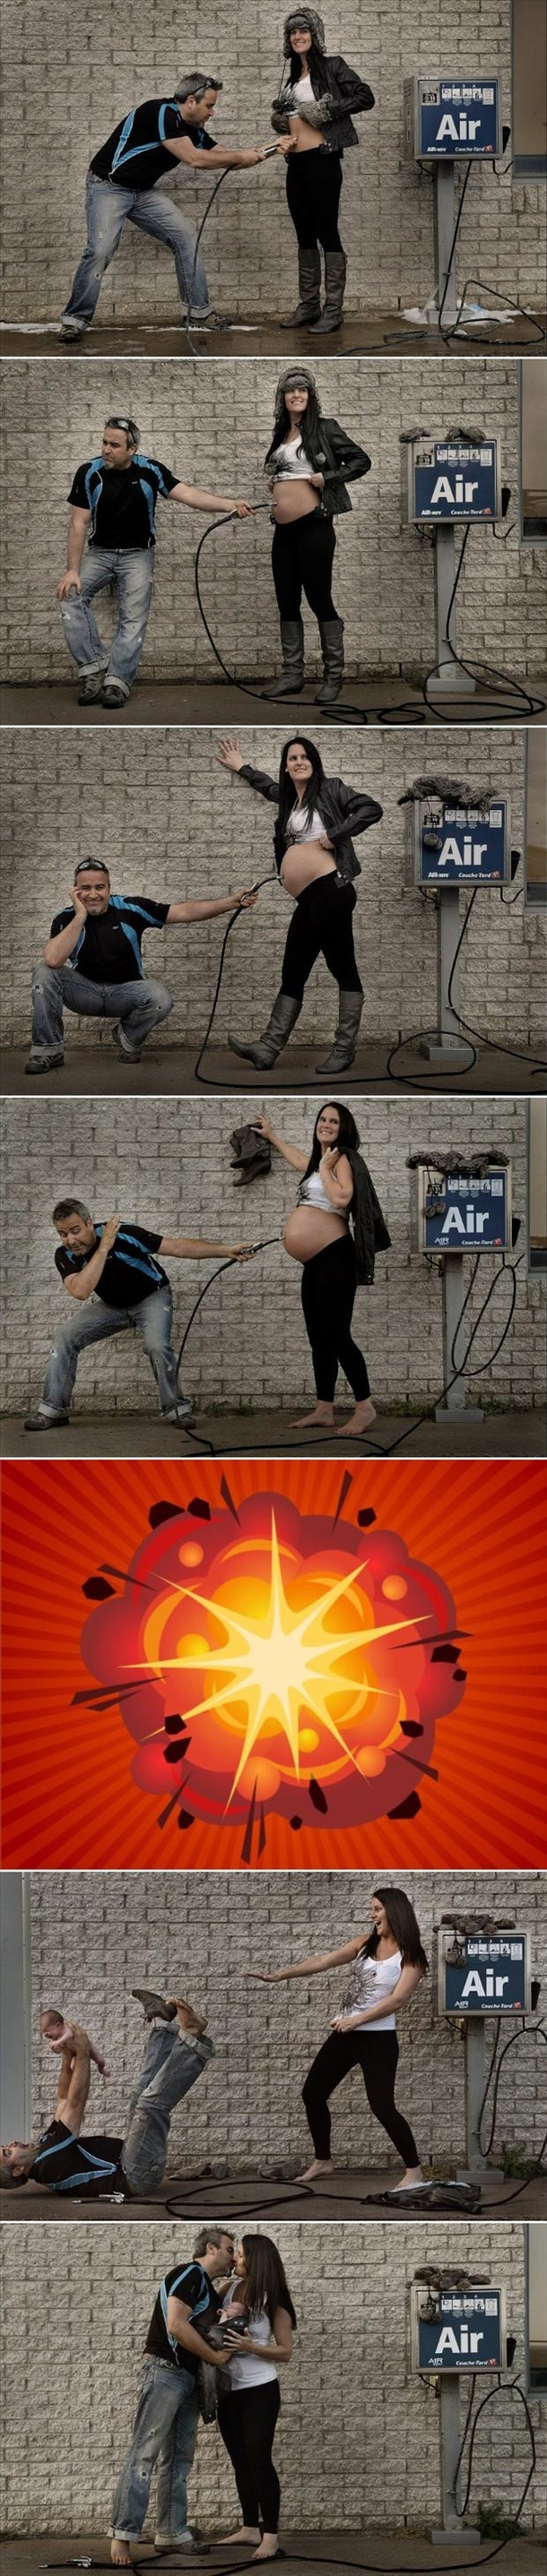 Here is a new way to become pregnant